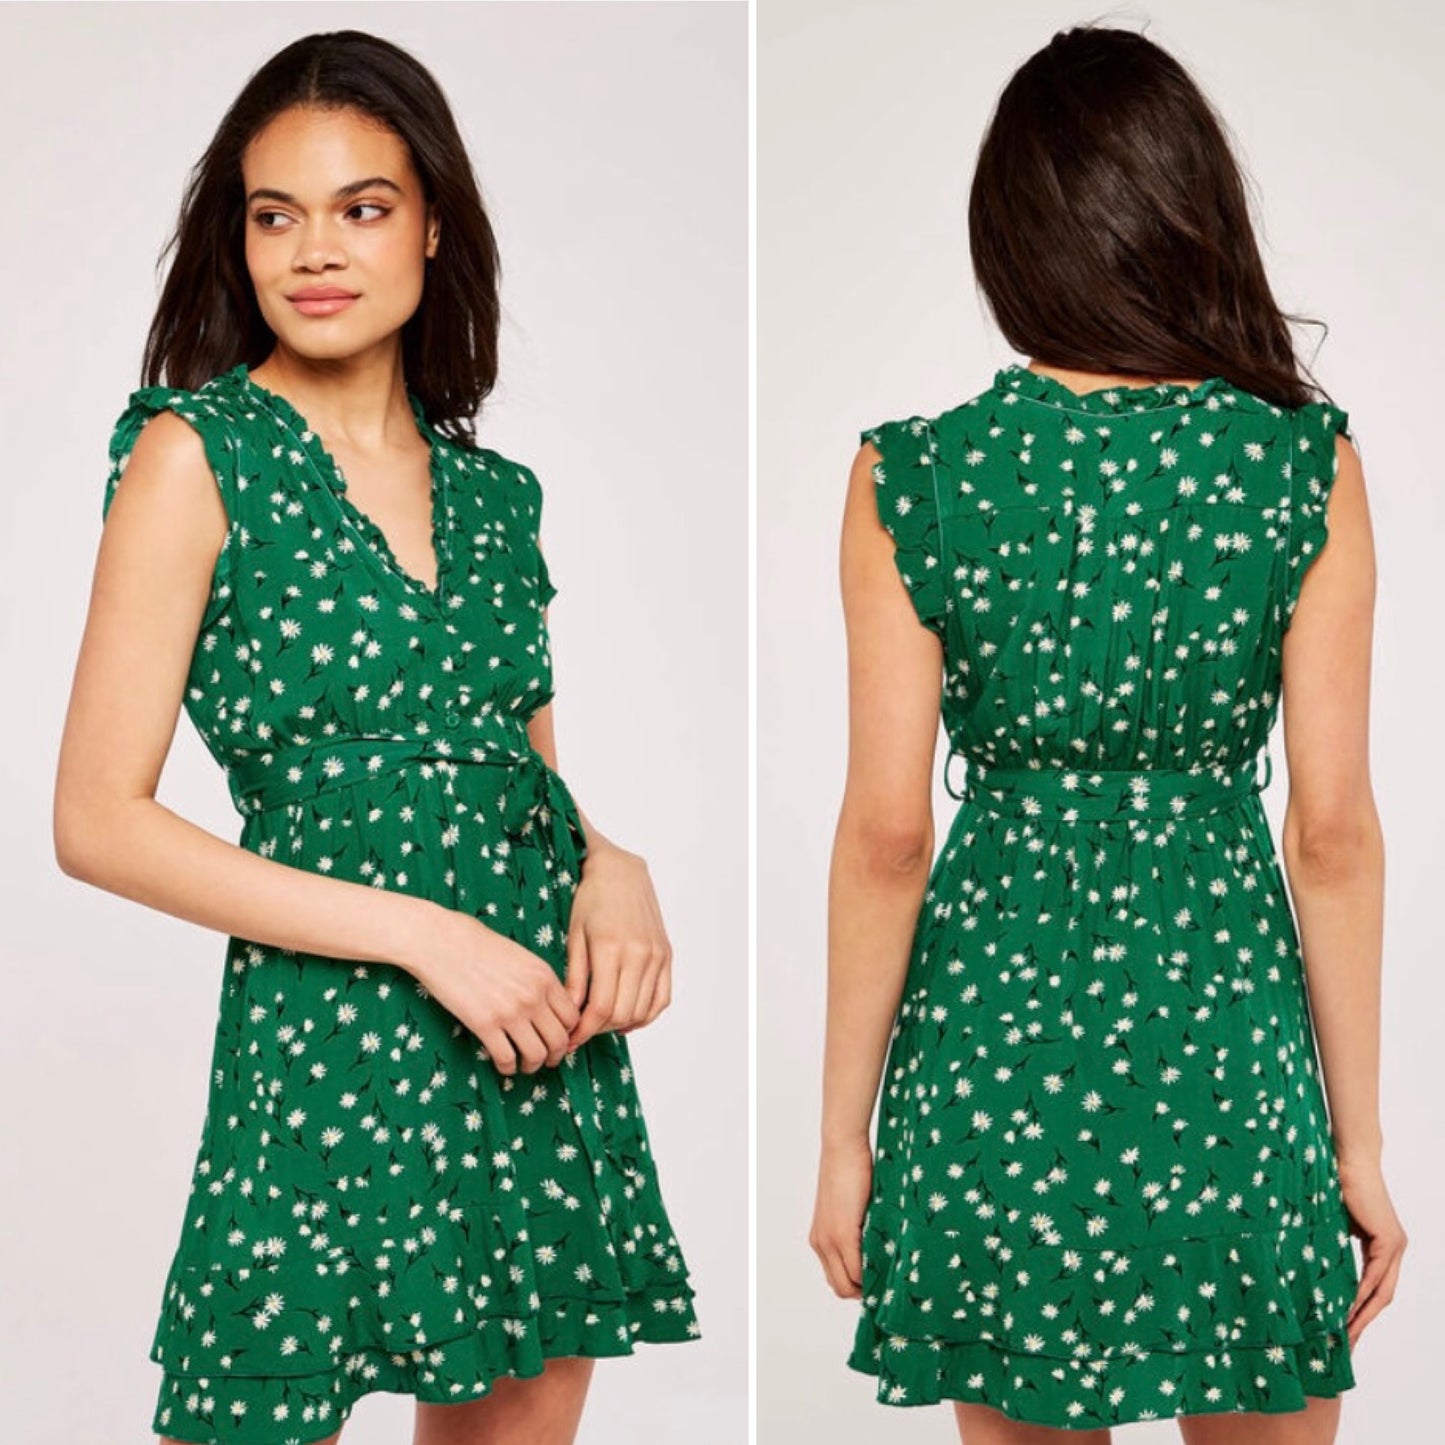 Scattered Daisy Dress